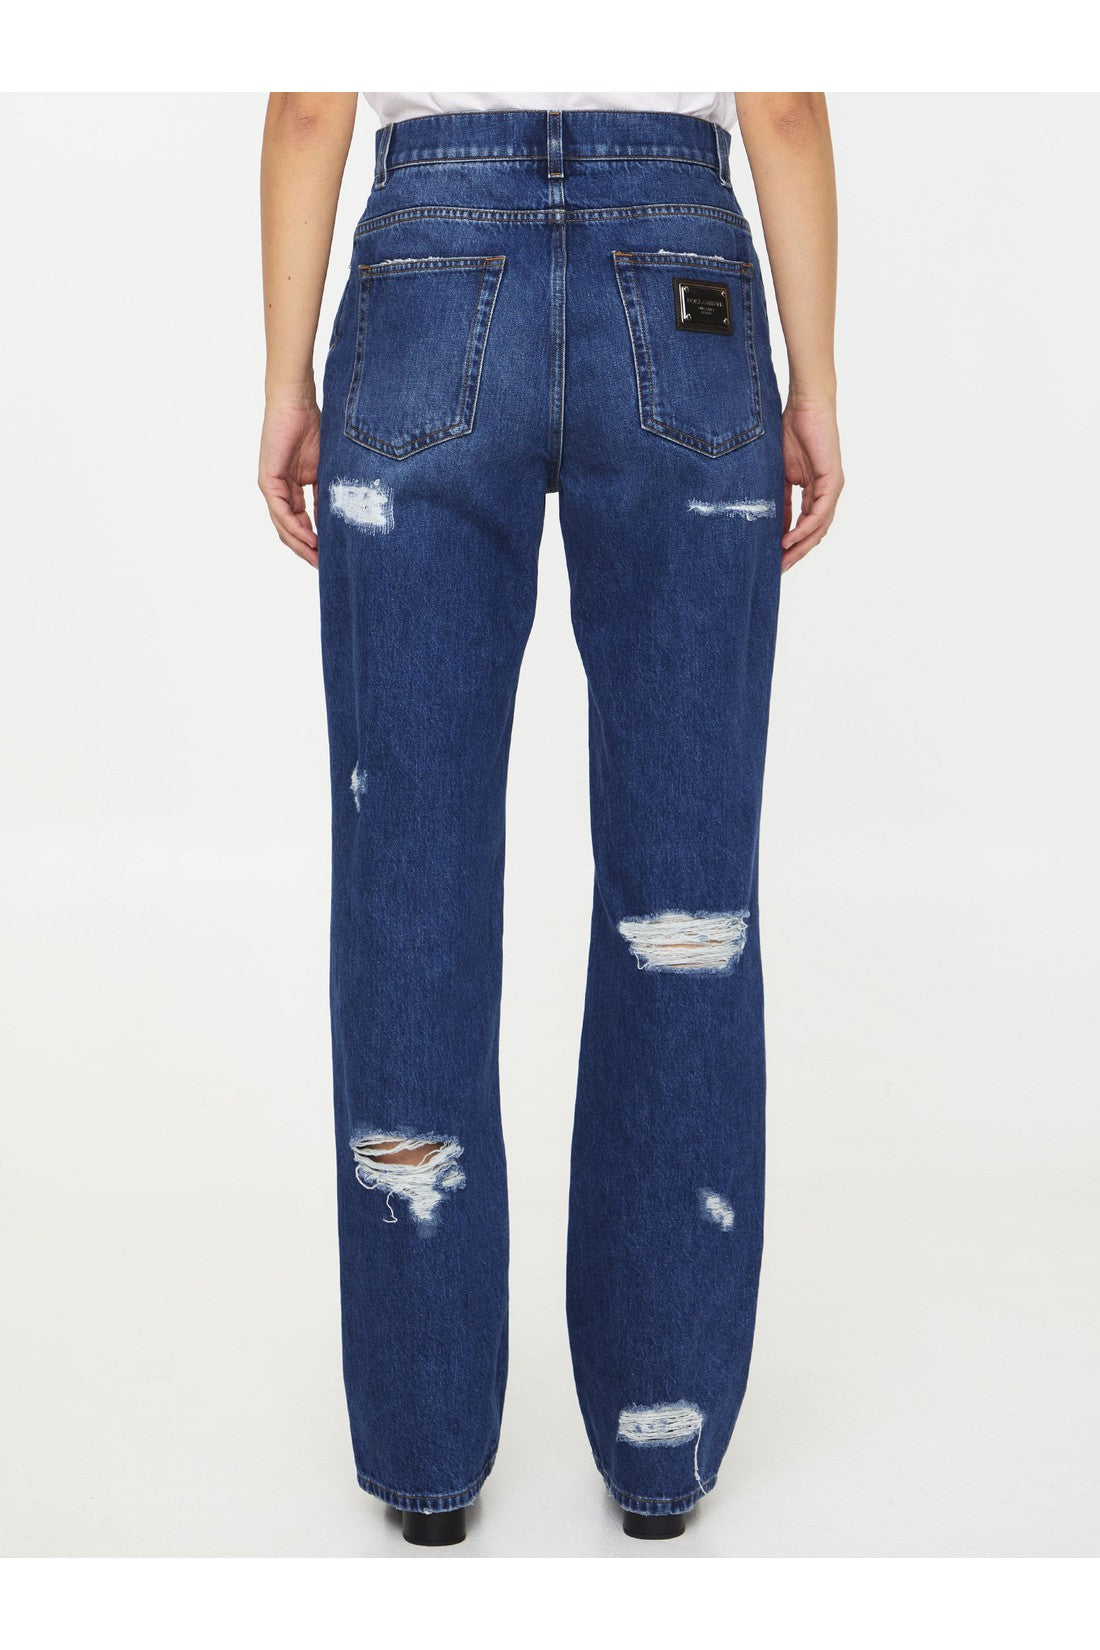 Distressed jeans with Leo print